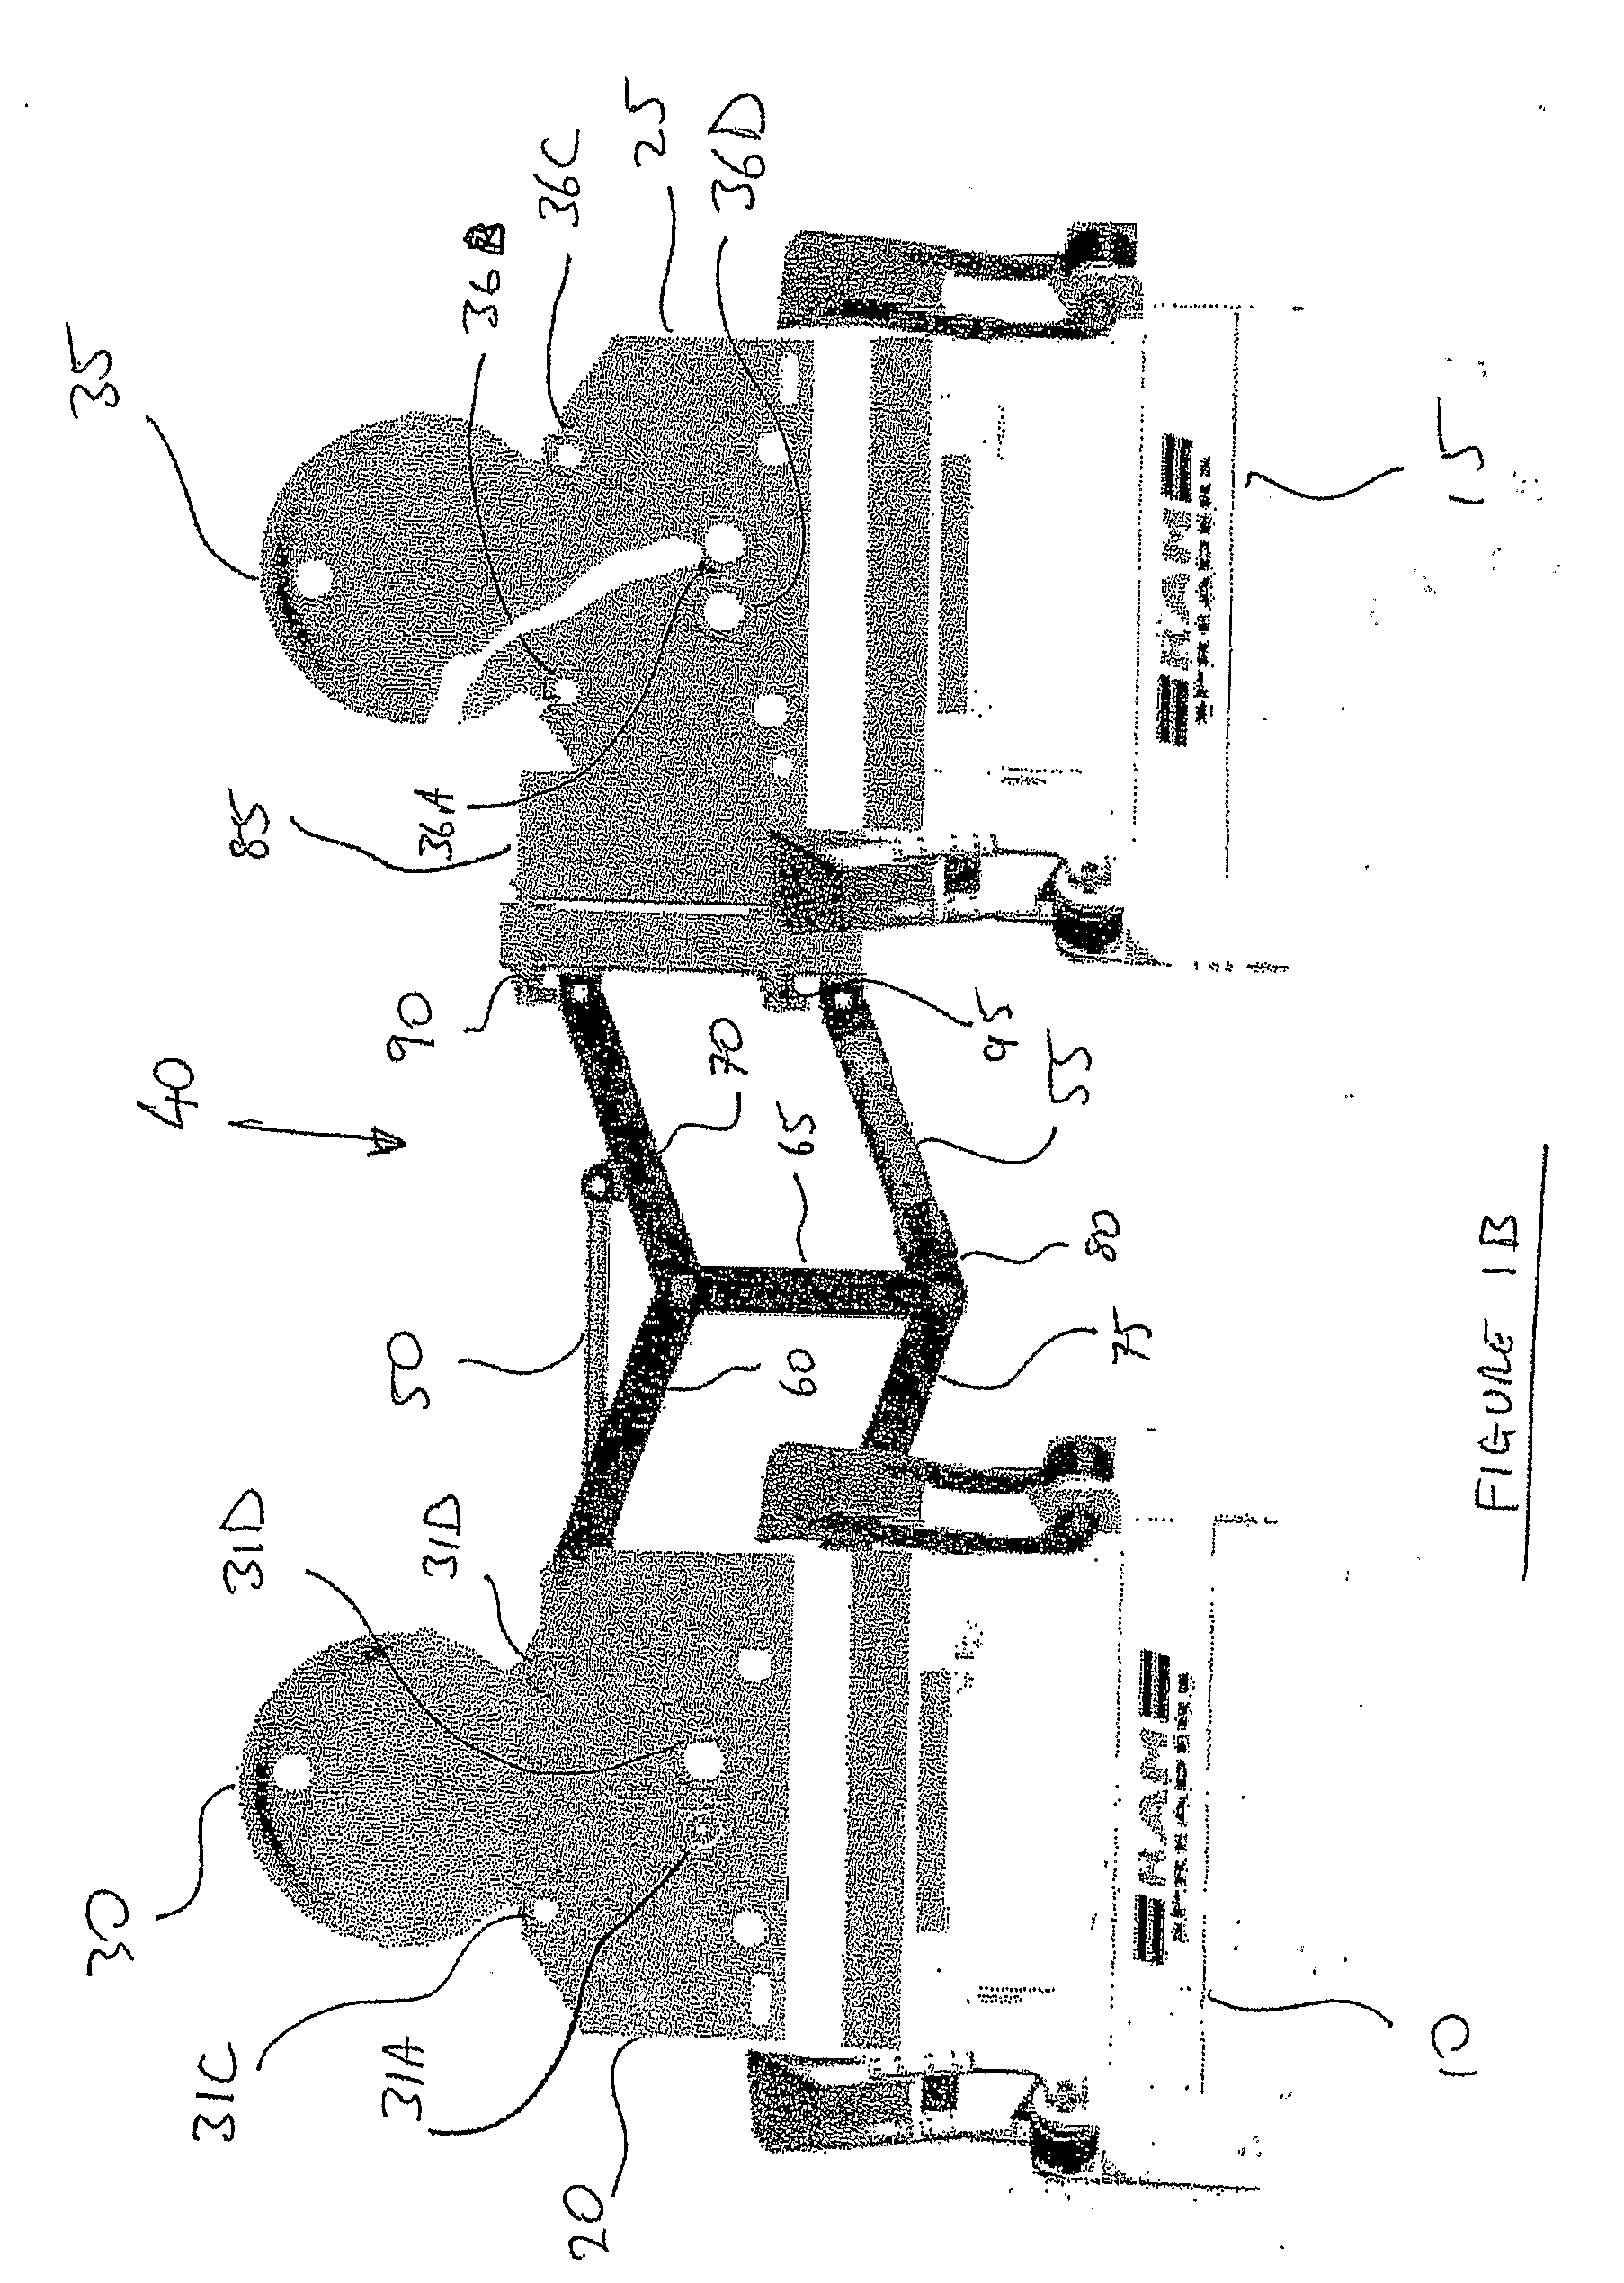 Method and apparatus for effecting relative movement of containers